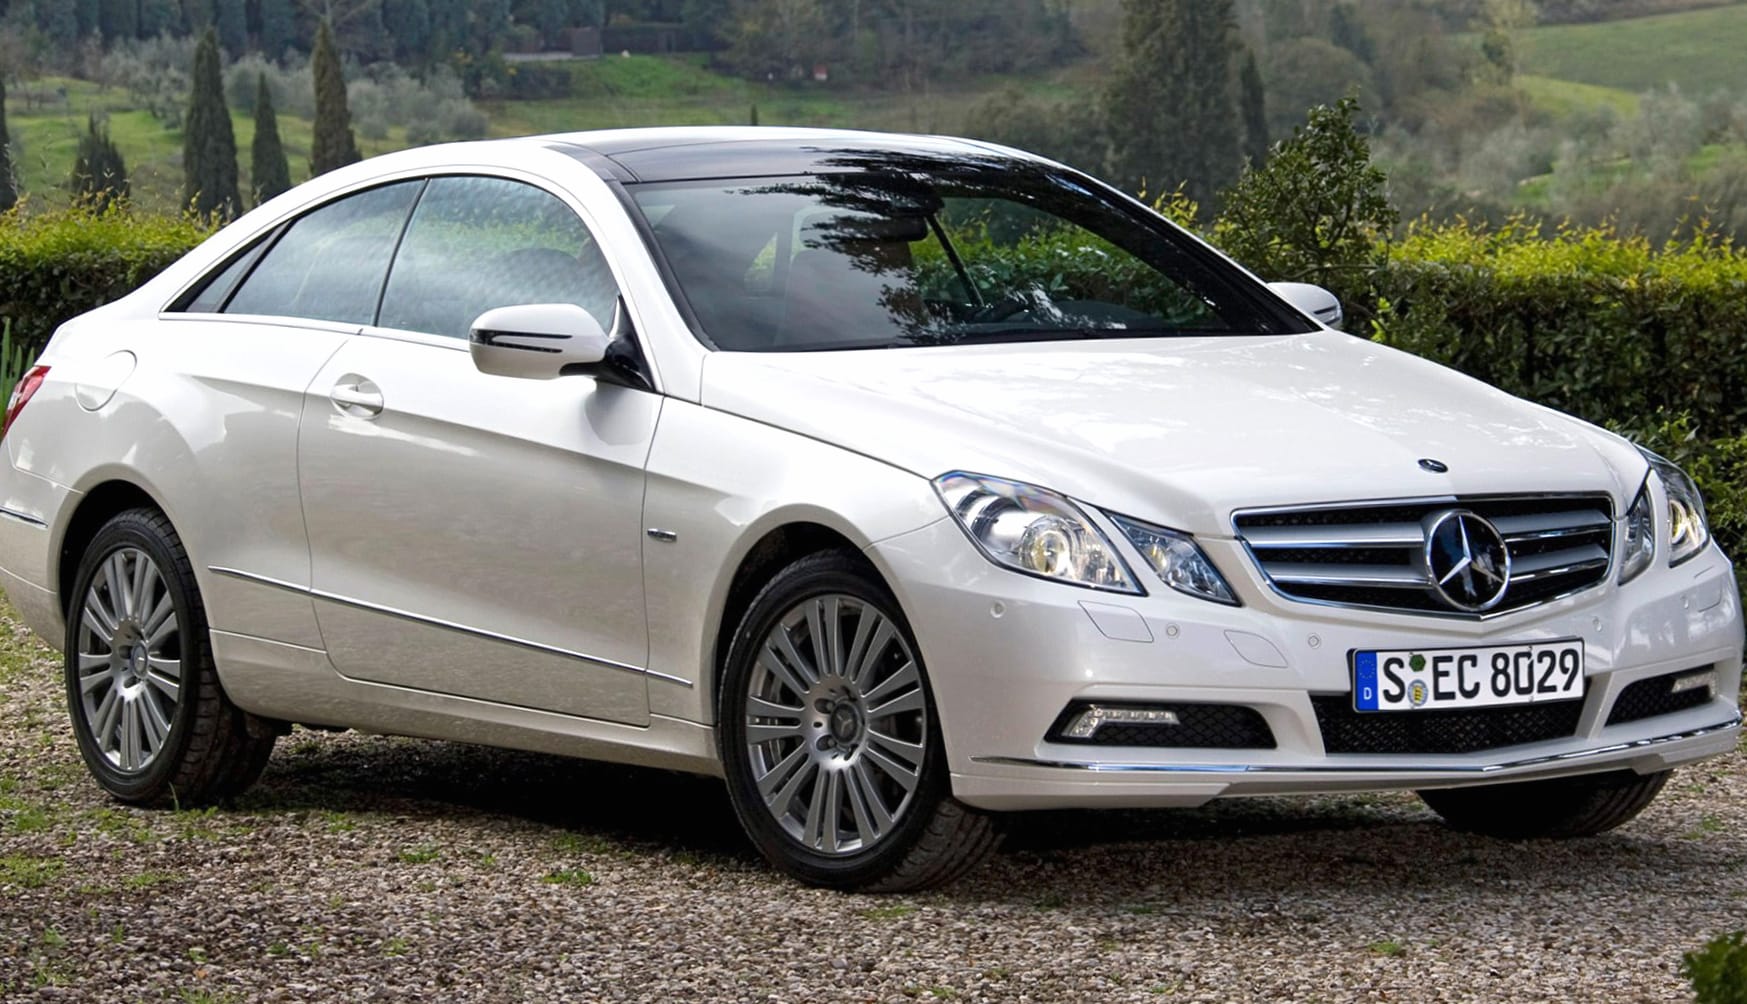 Mercedes-Benz E 350 CGI Coupe wallpapers HD quality